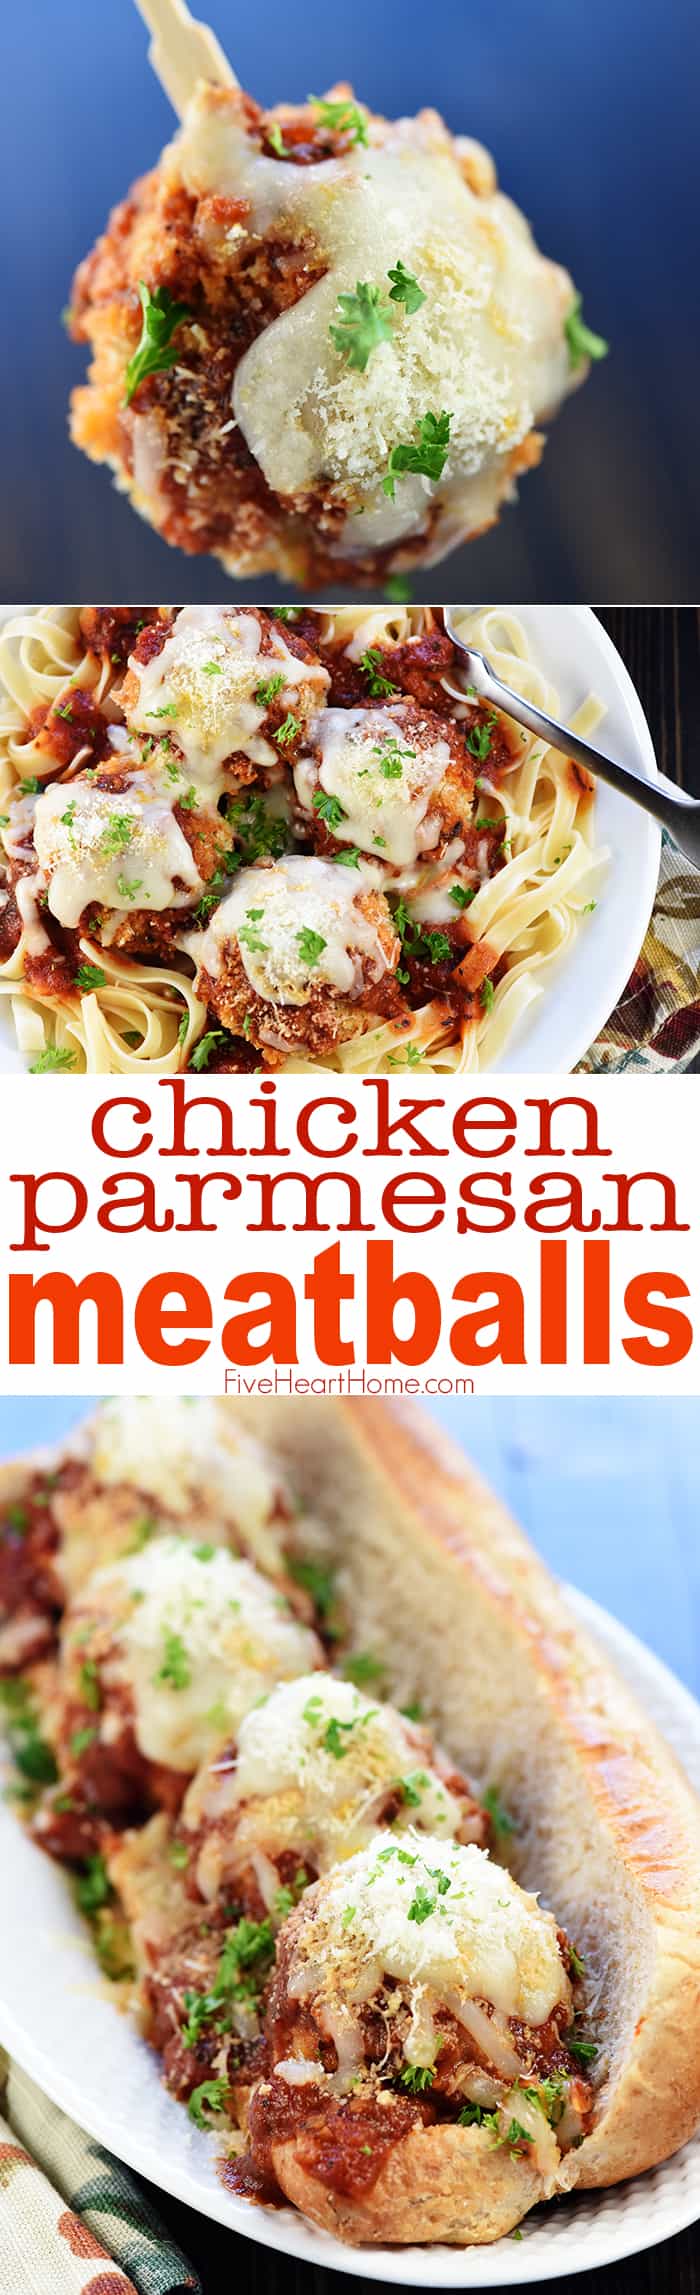 Chicken Parmesan Meatballs ~ a ground chicken mixture is formed into meatballs, rolled in Panko and Parmesan, baked, and then covered in flavorful marinara sauce and melted mozzarella...perfect for serving as an appetizer, over pasta, or on subs! | FiveHeartHome.com via @fivehearthome